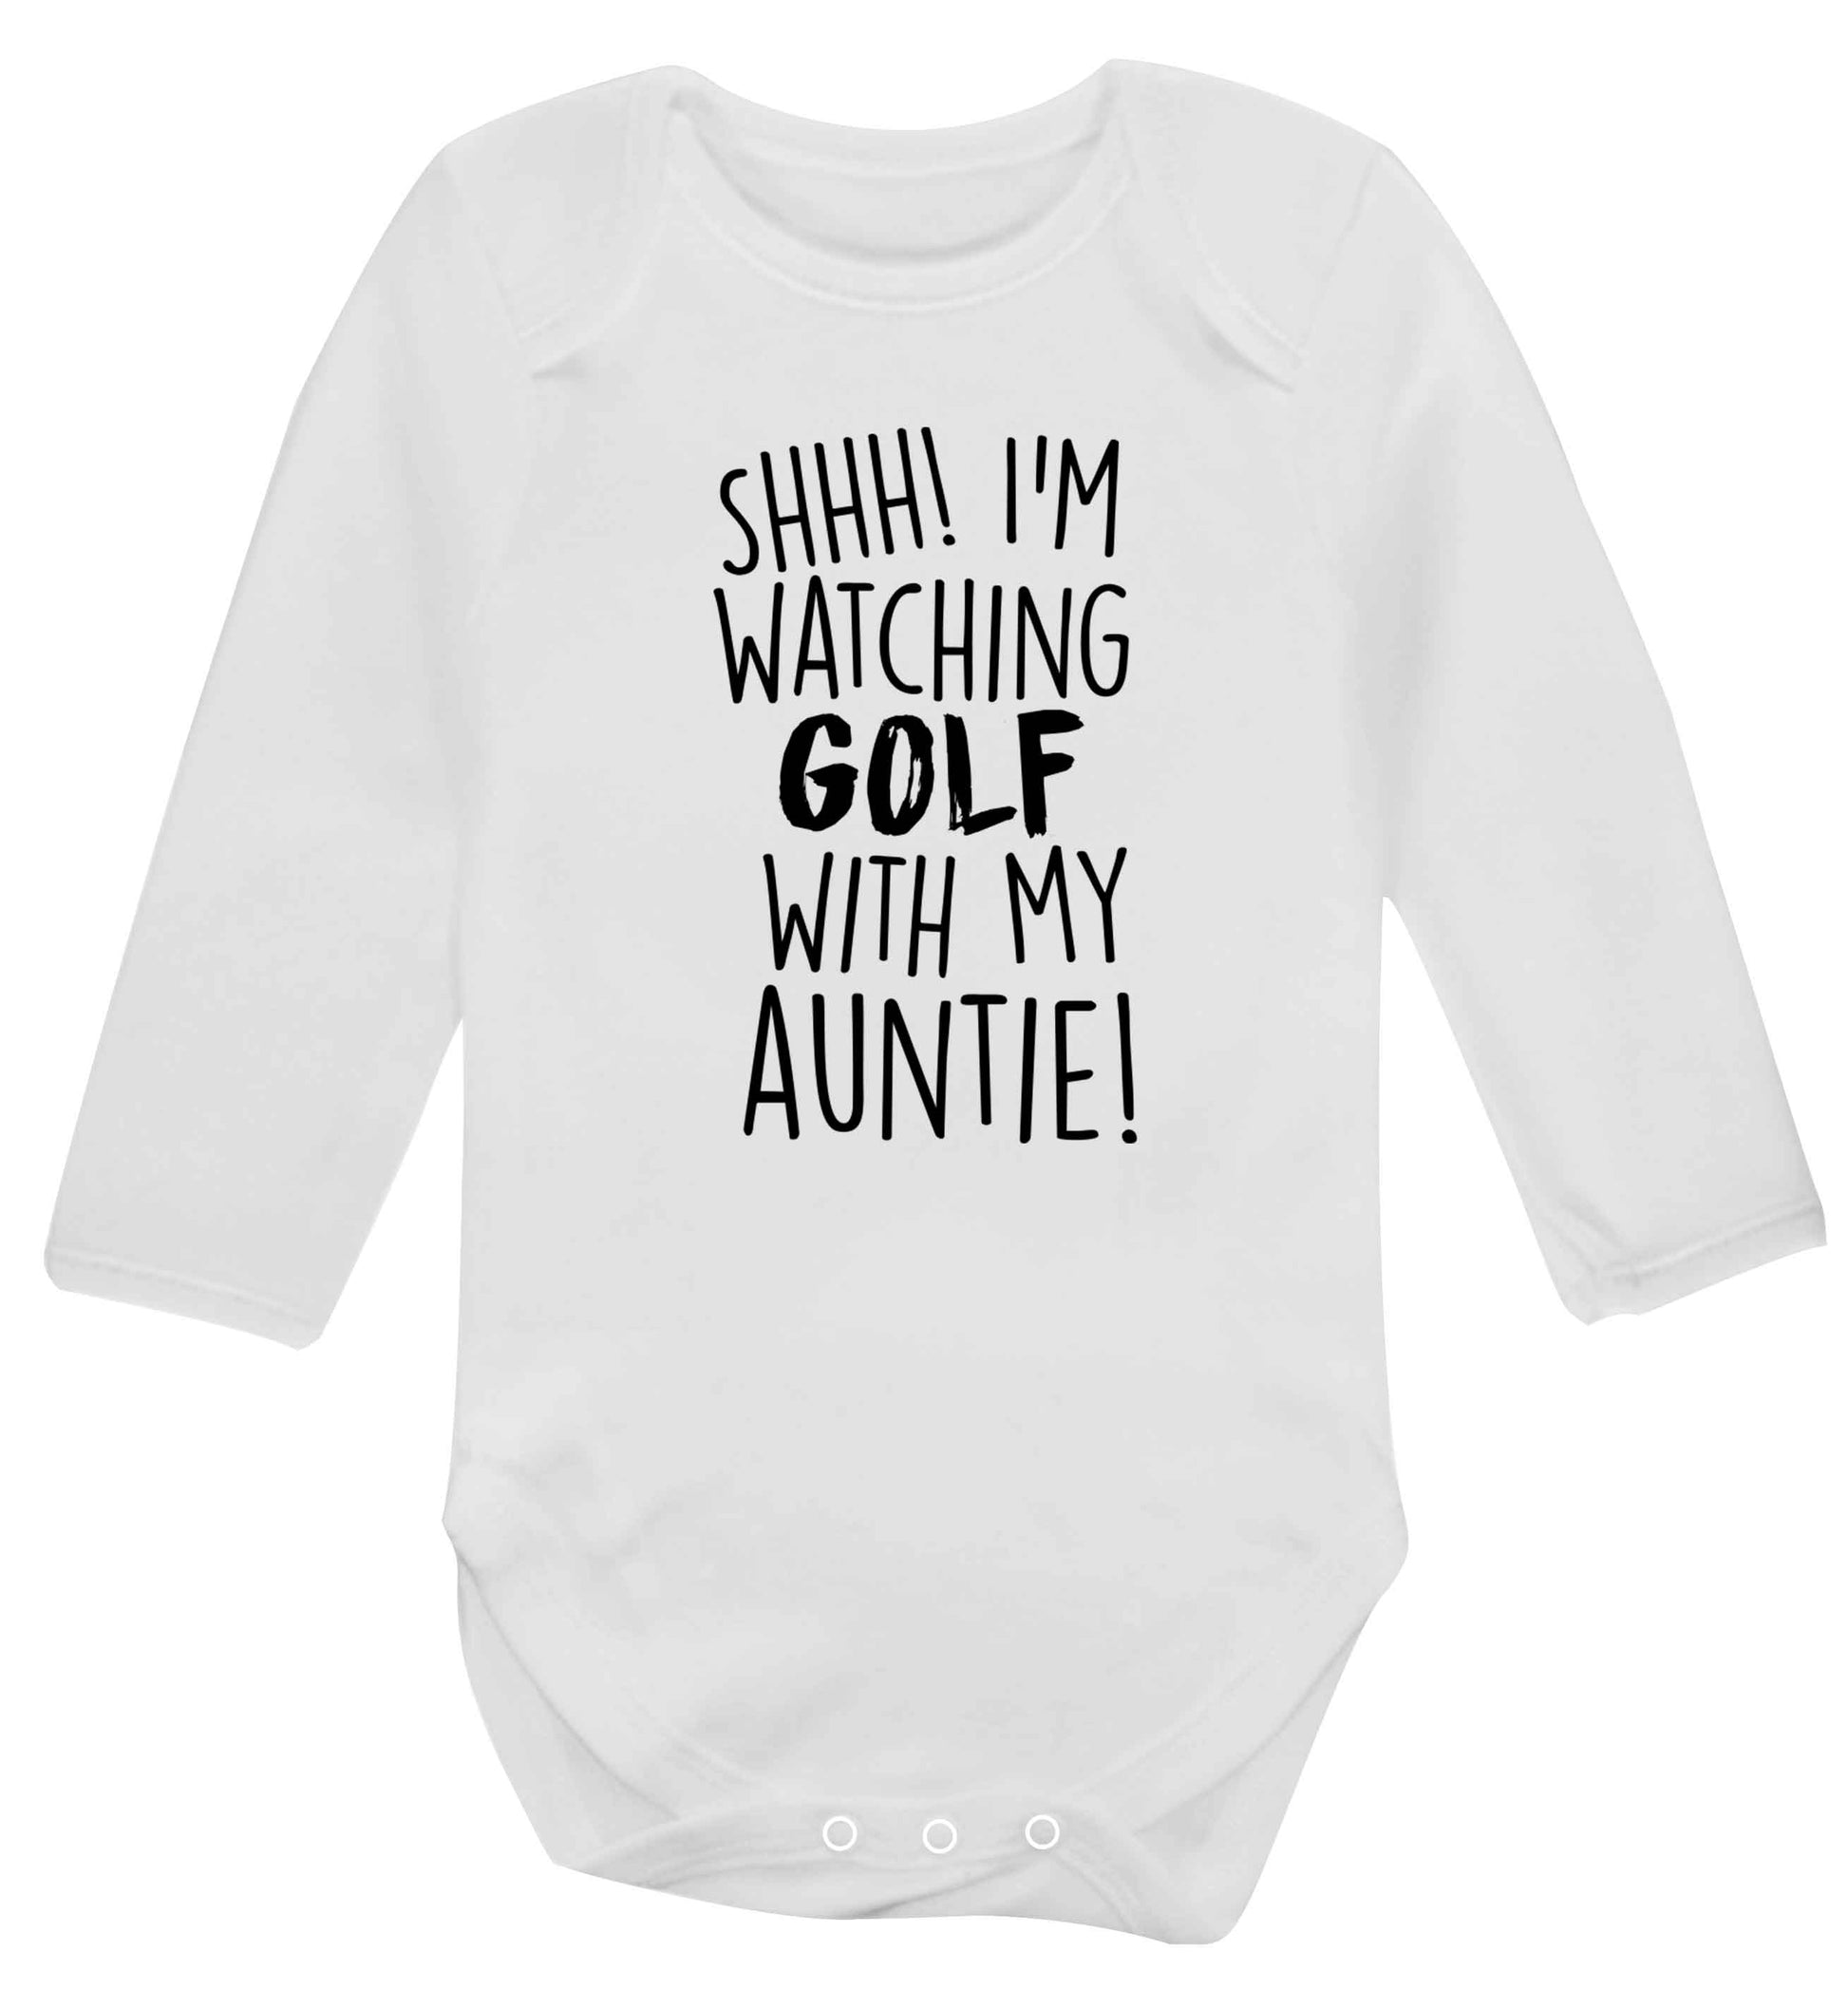 Shh I'm watching golf with my auntie Baby Vest long sleeved white 6-12 months